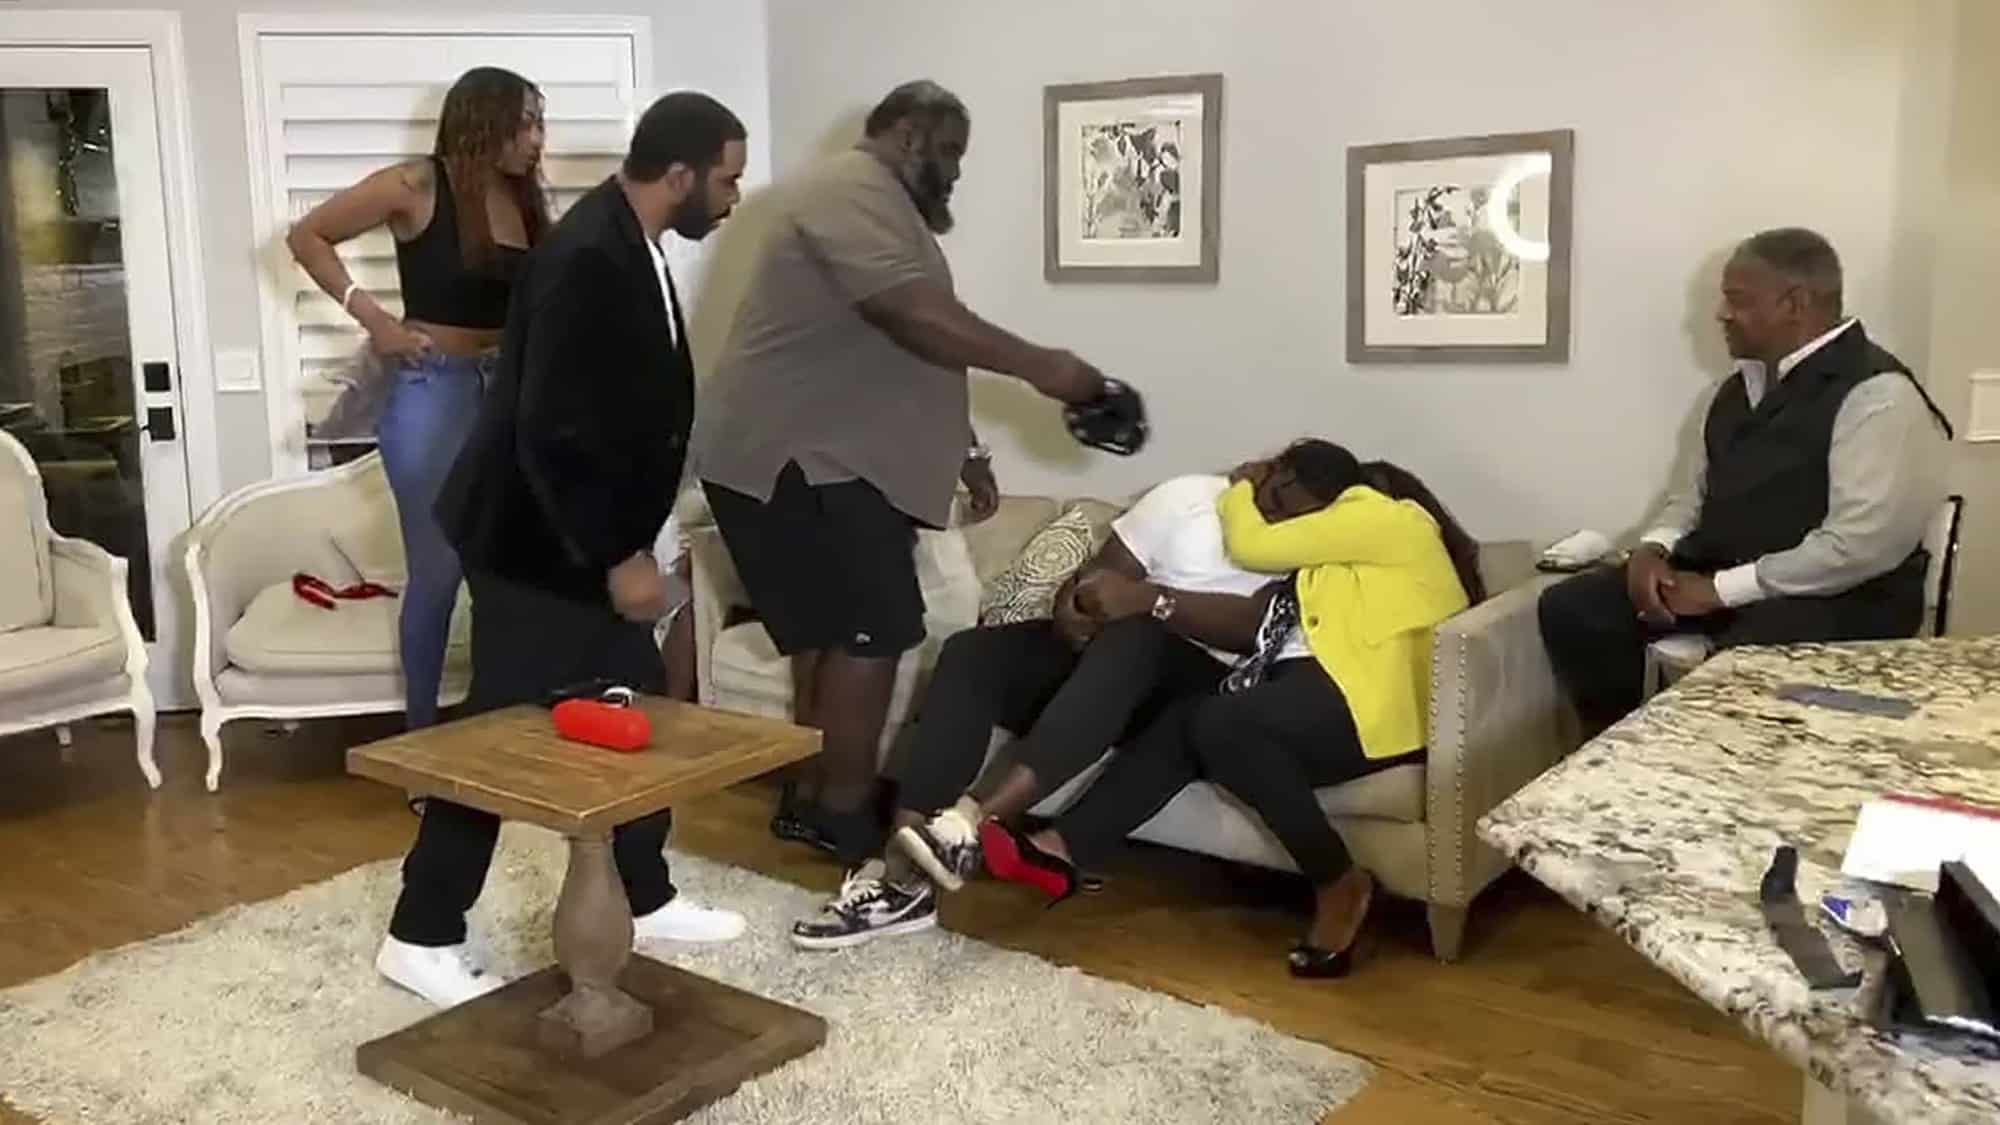 UNSPECIFIED LOCATION - APRIL 23: (EDITORIAL USE ONLY) In this still image from video provided by the NFL, Mekhi Becton, third from right, is hugged after being selected by the New York Jets during the first round of the 2020 NFL Draft on April 23, 2020.